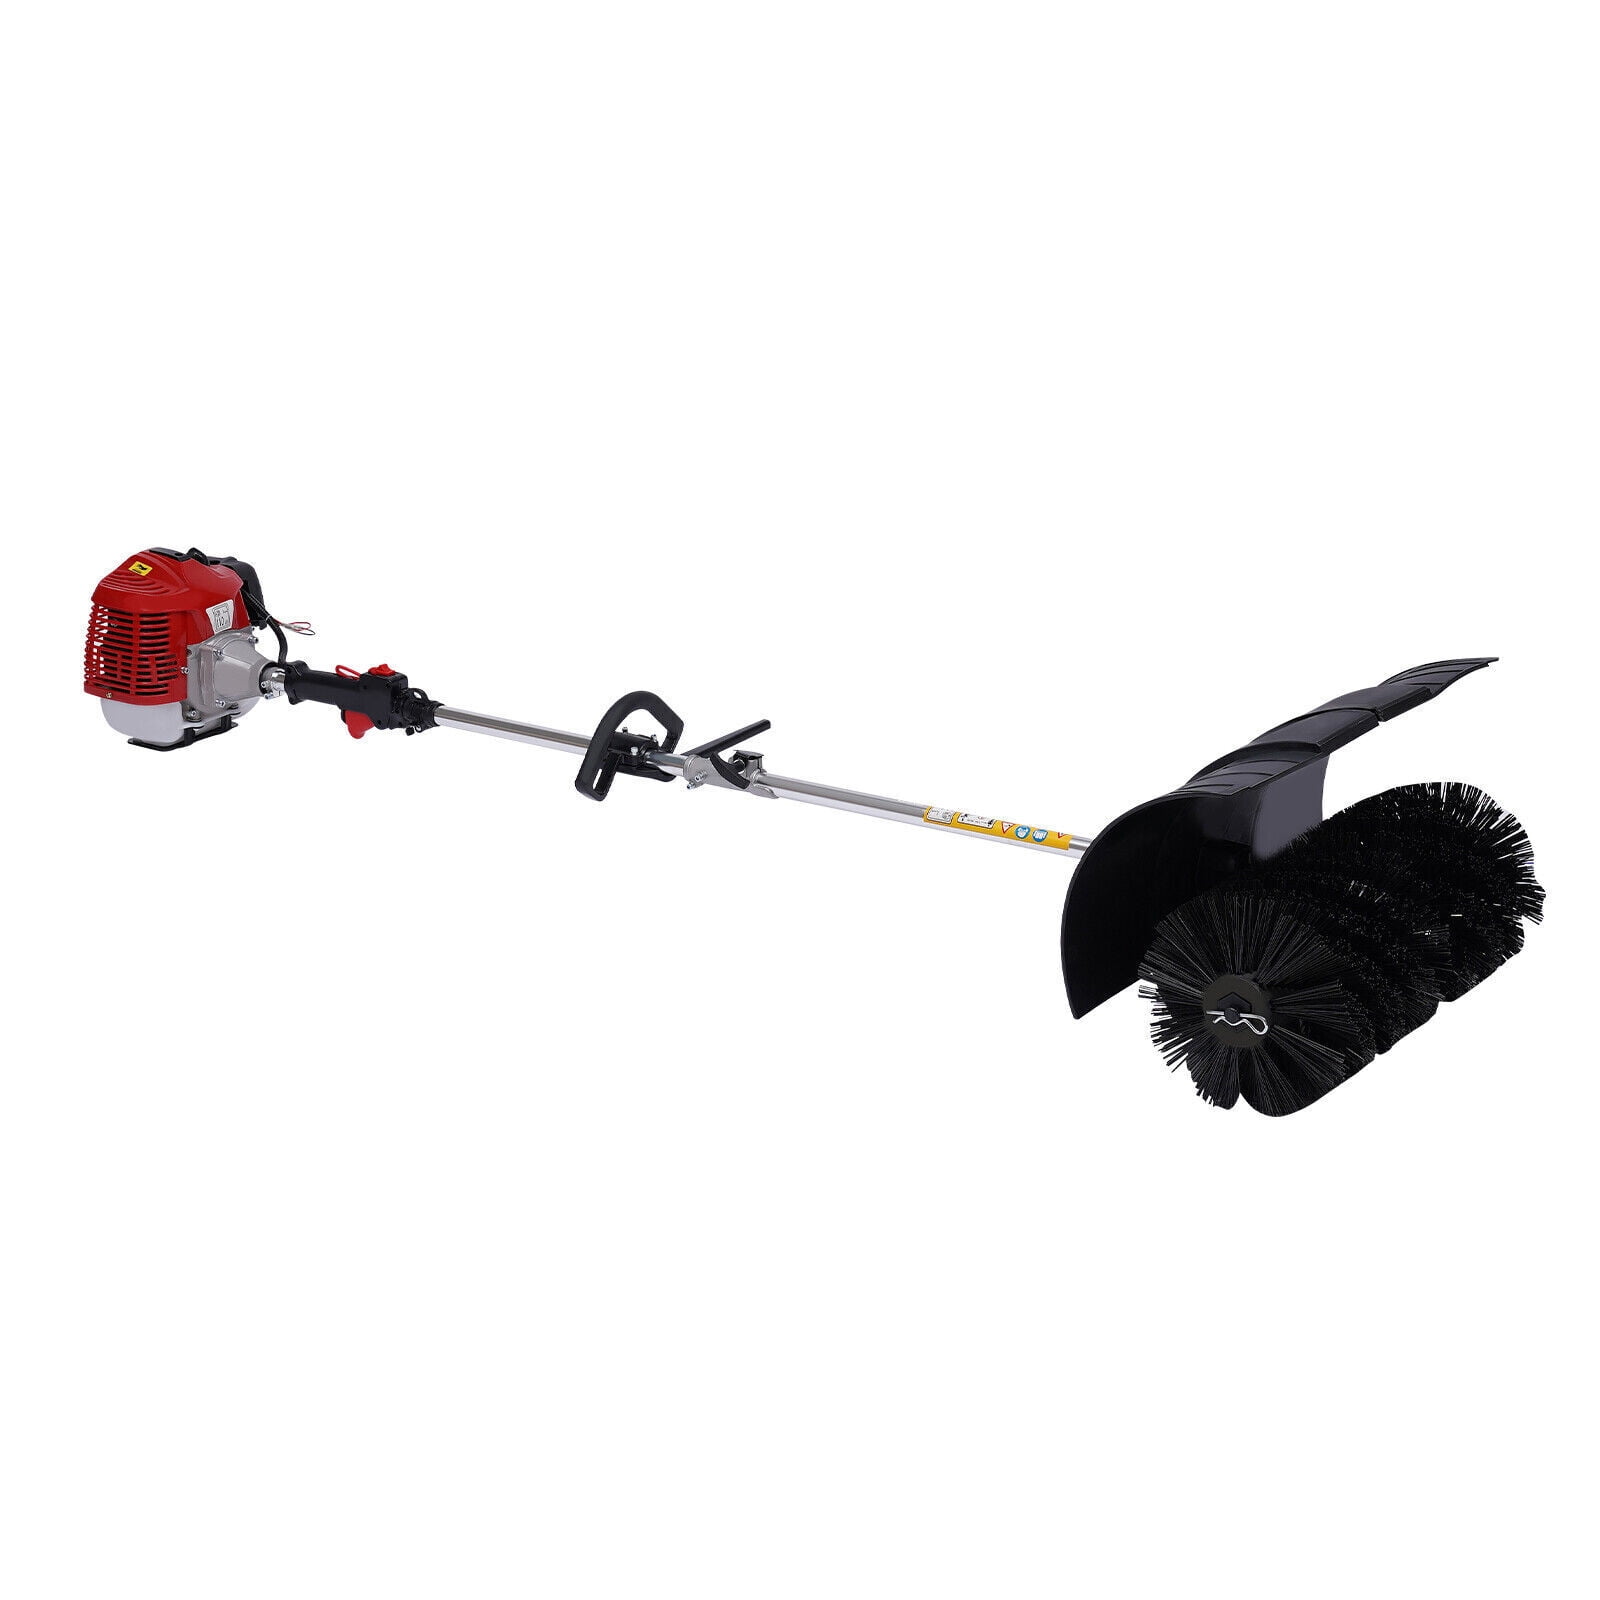 52CC HANDHELD GAS POWER SWEEPER BROOM DRIVEWAY TURF ARTIFICIAL GRASS SNOW CLEAN 